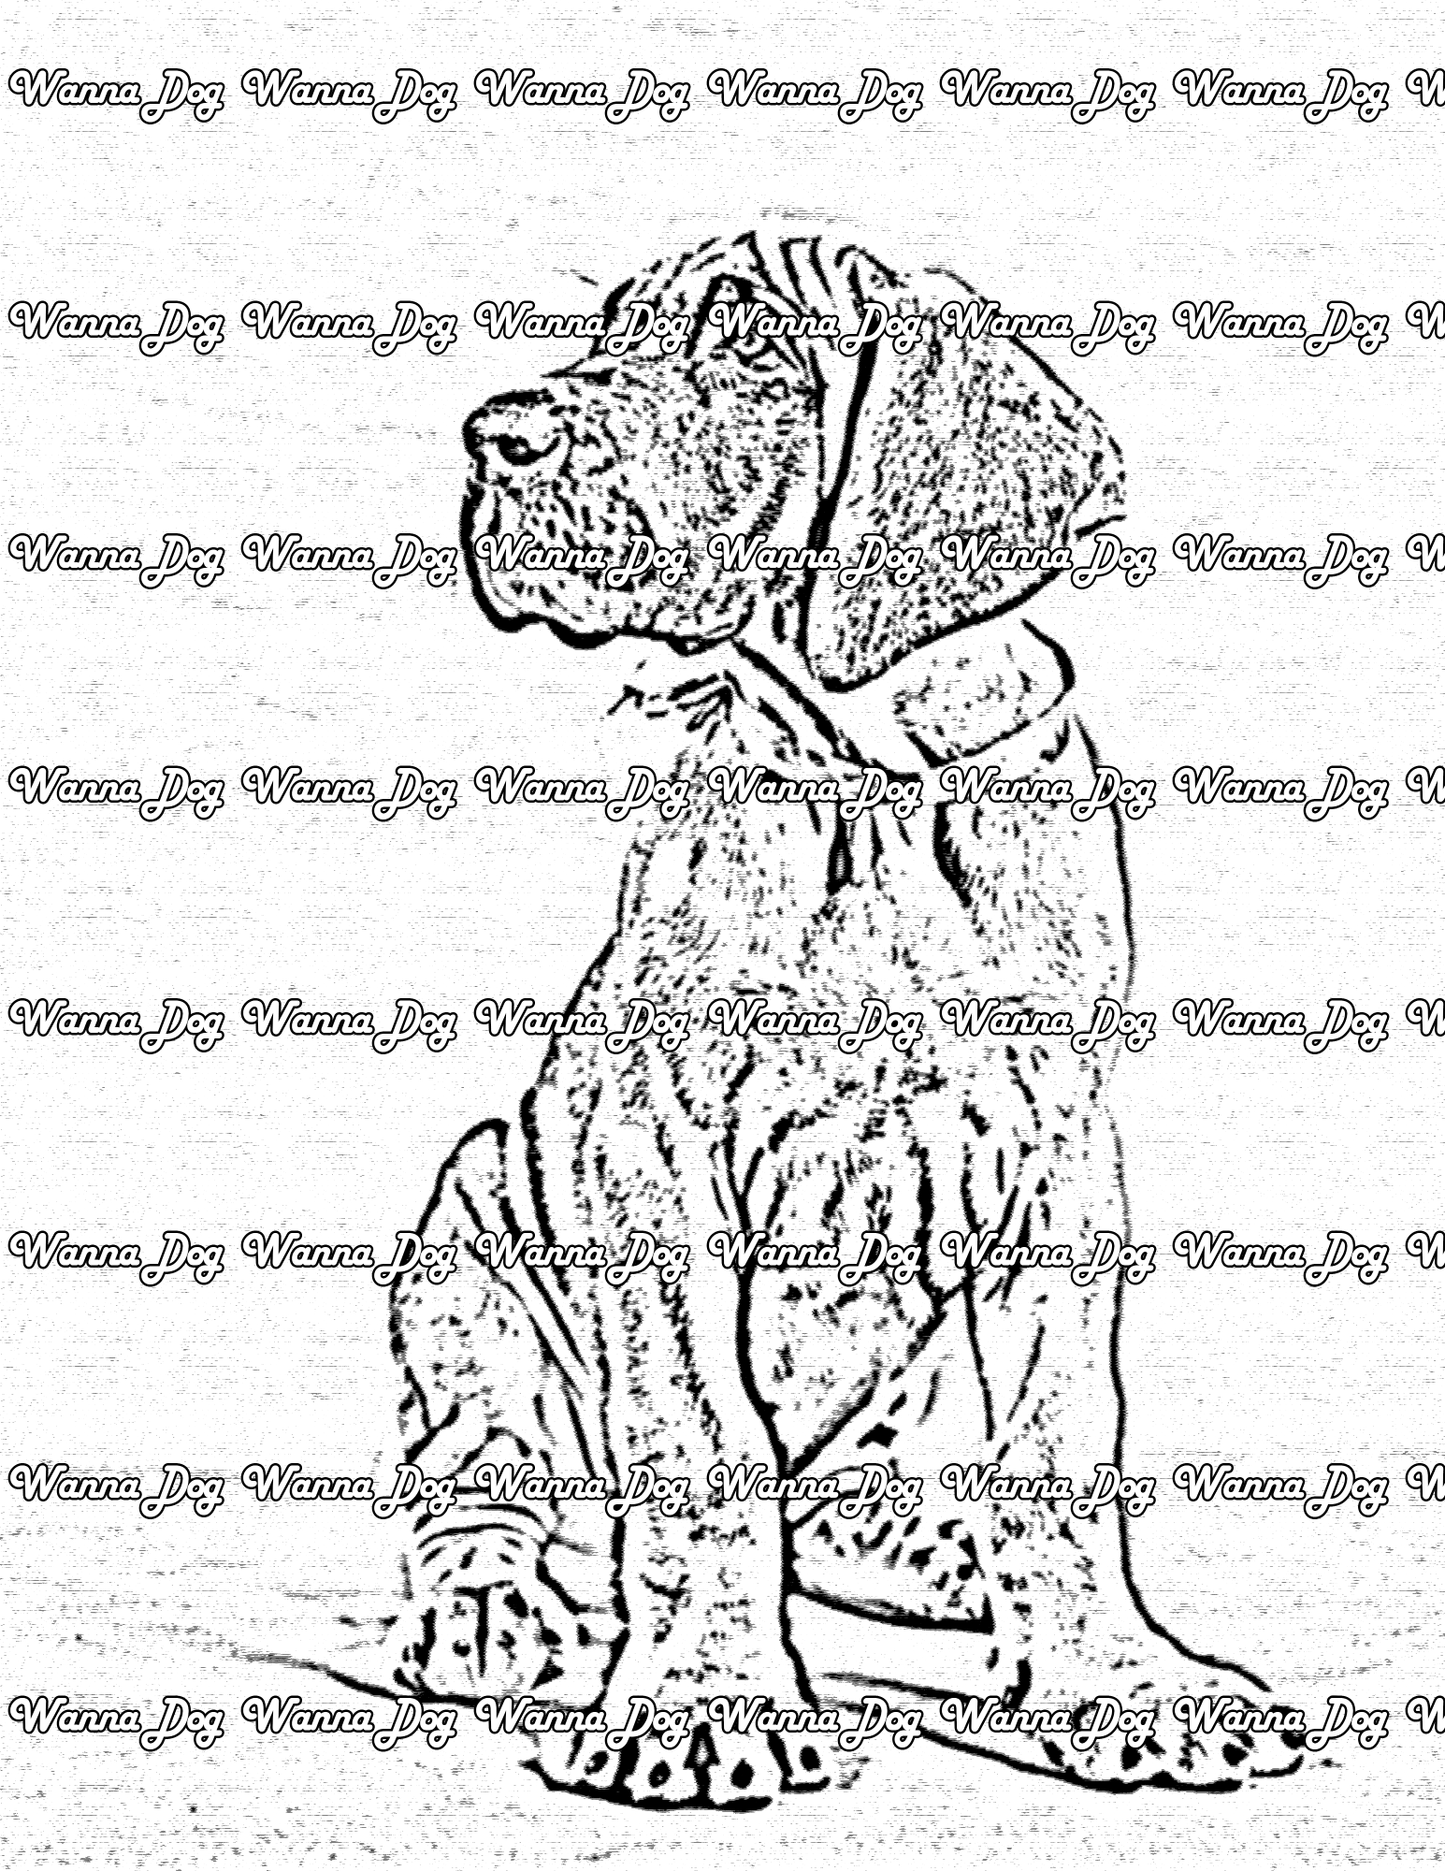 Great Dane Coloring Page of a Great Dane puppy looking away from the camera